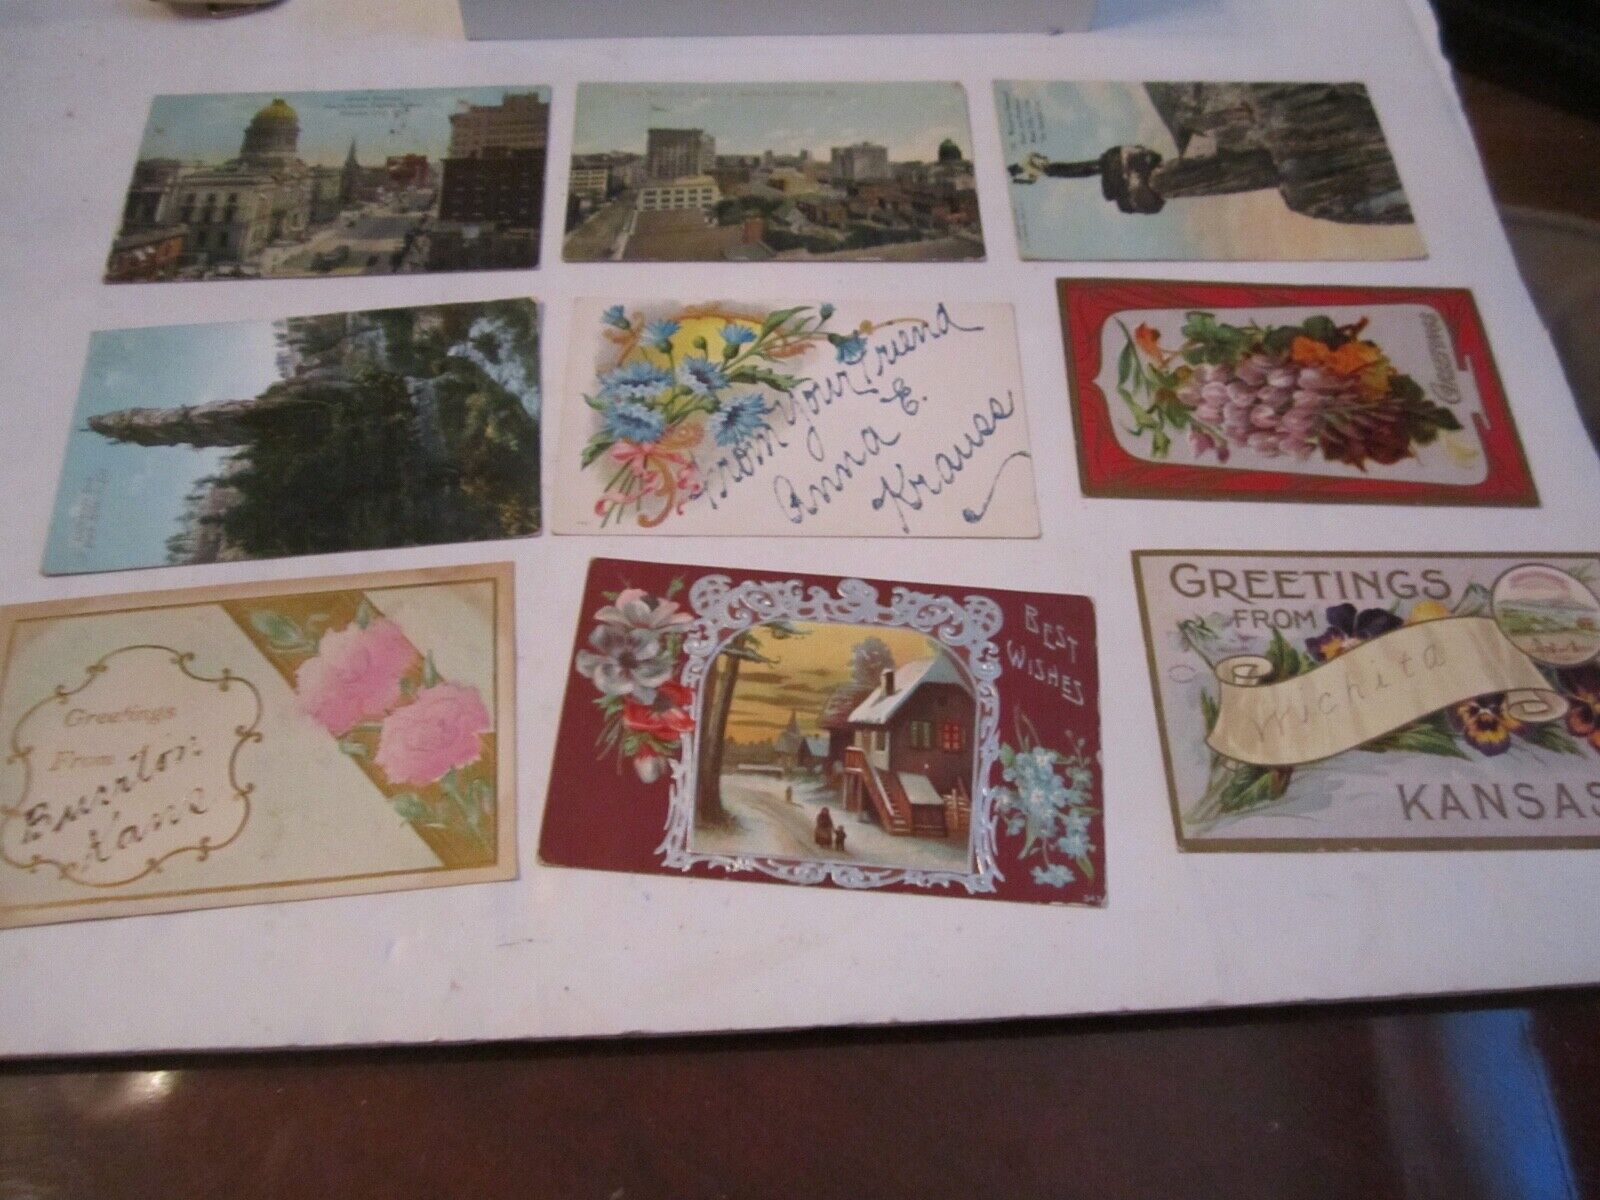 90 ANTIQUE POSTCARDS - MOST ARE 1910 - 1911 ARE STAMPED - TUB MMMM2